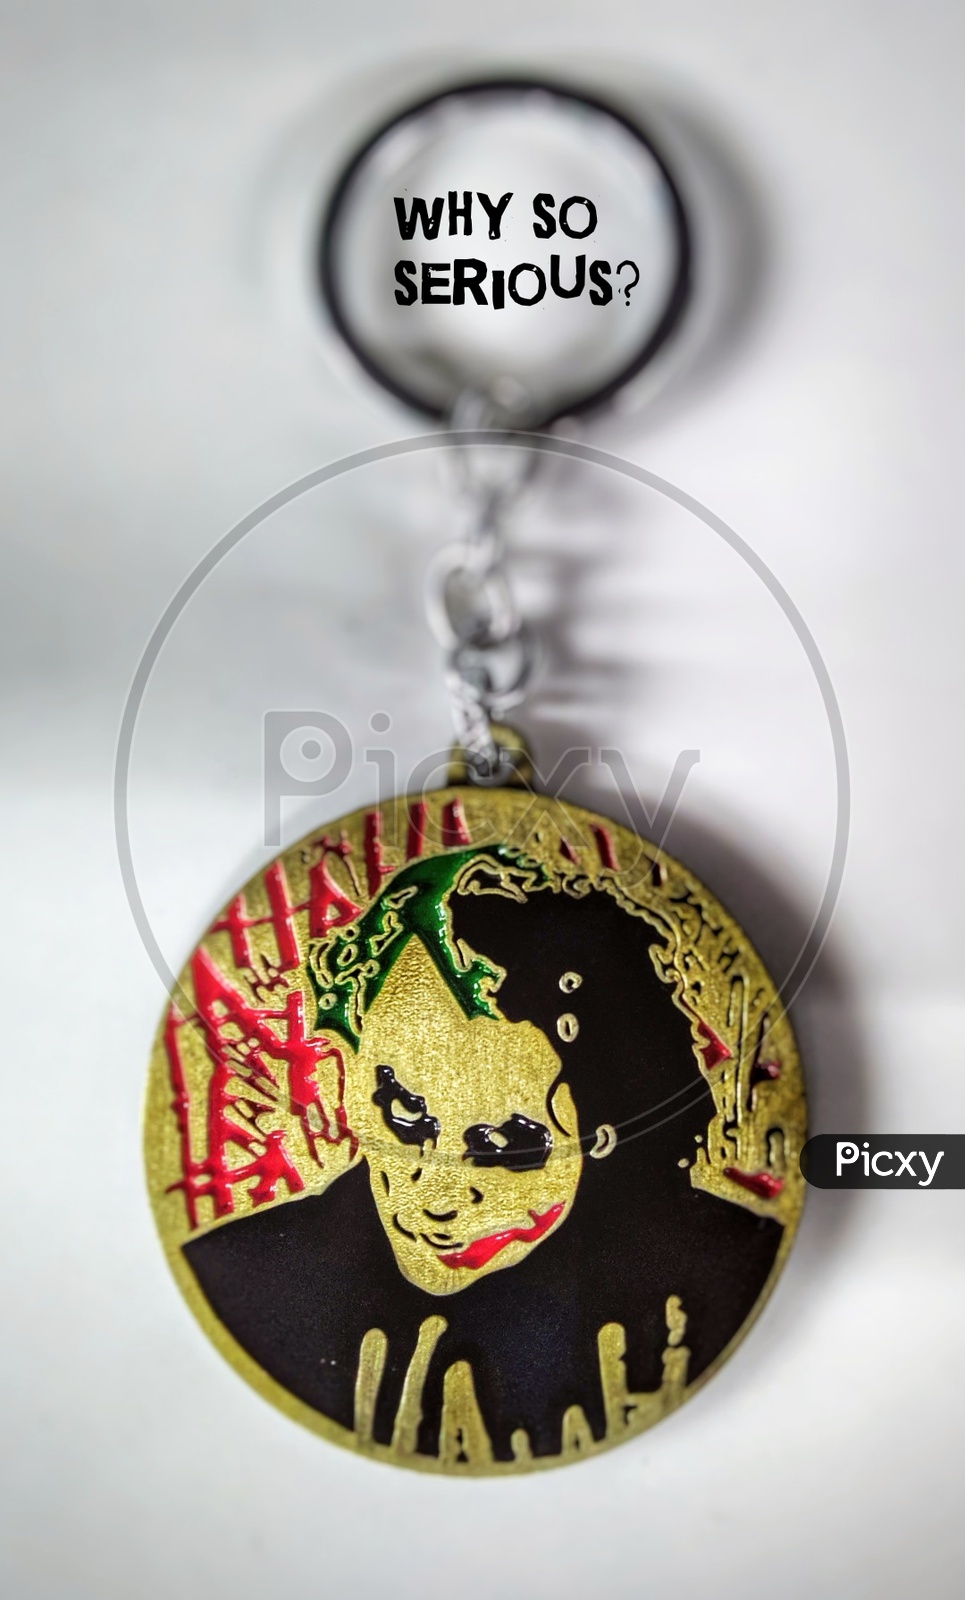 Joker keychain placed on a white table